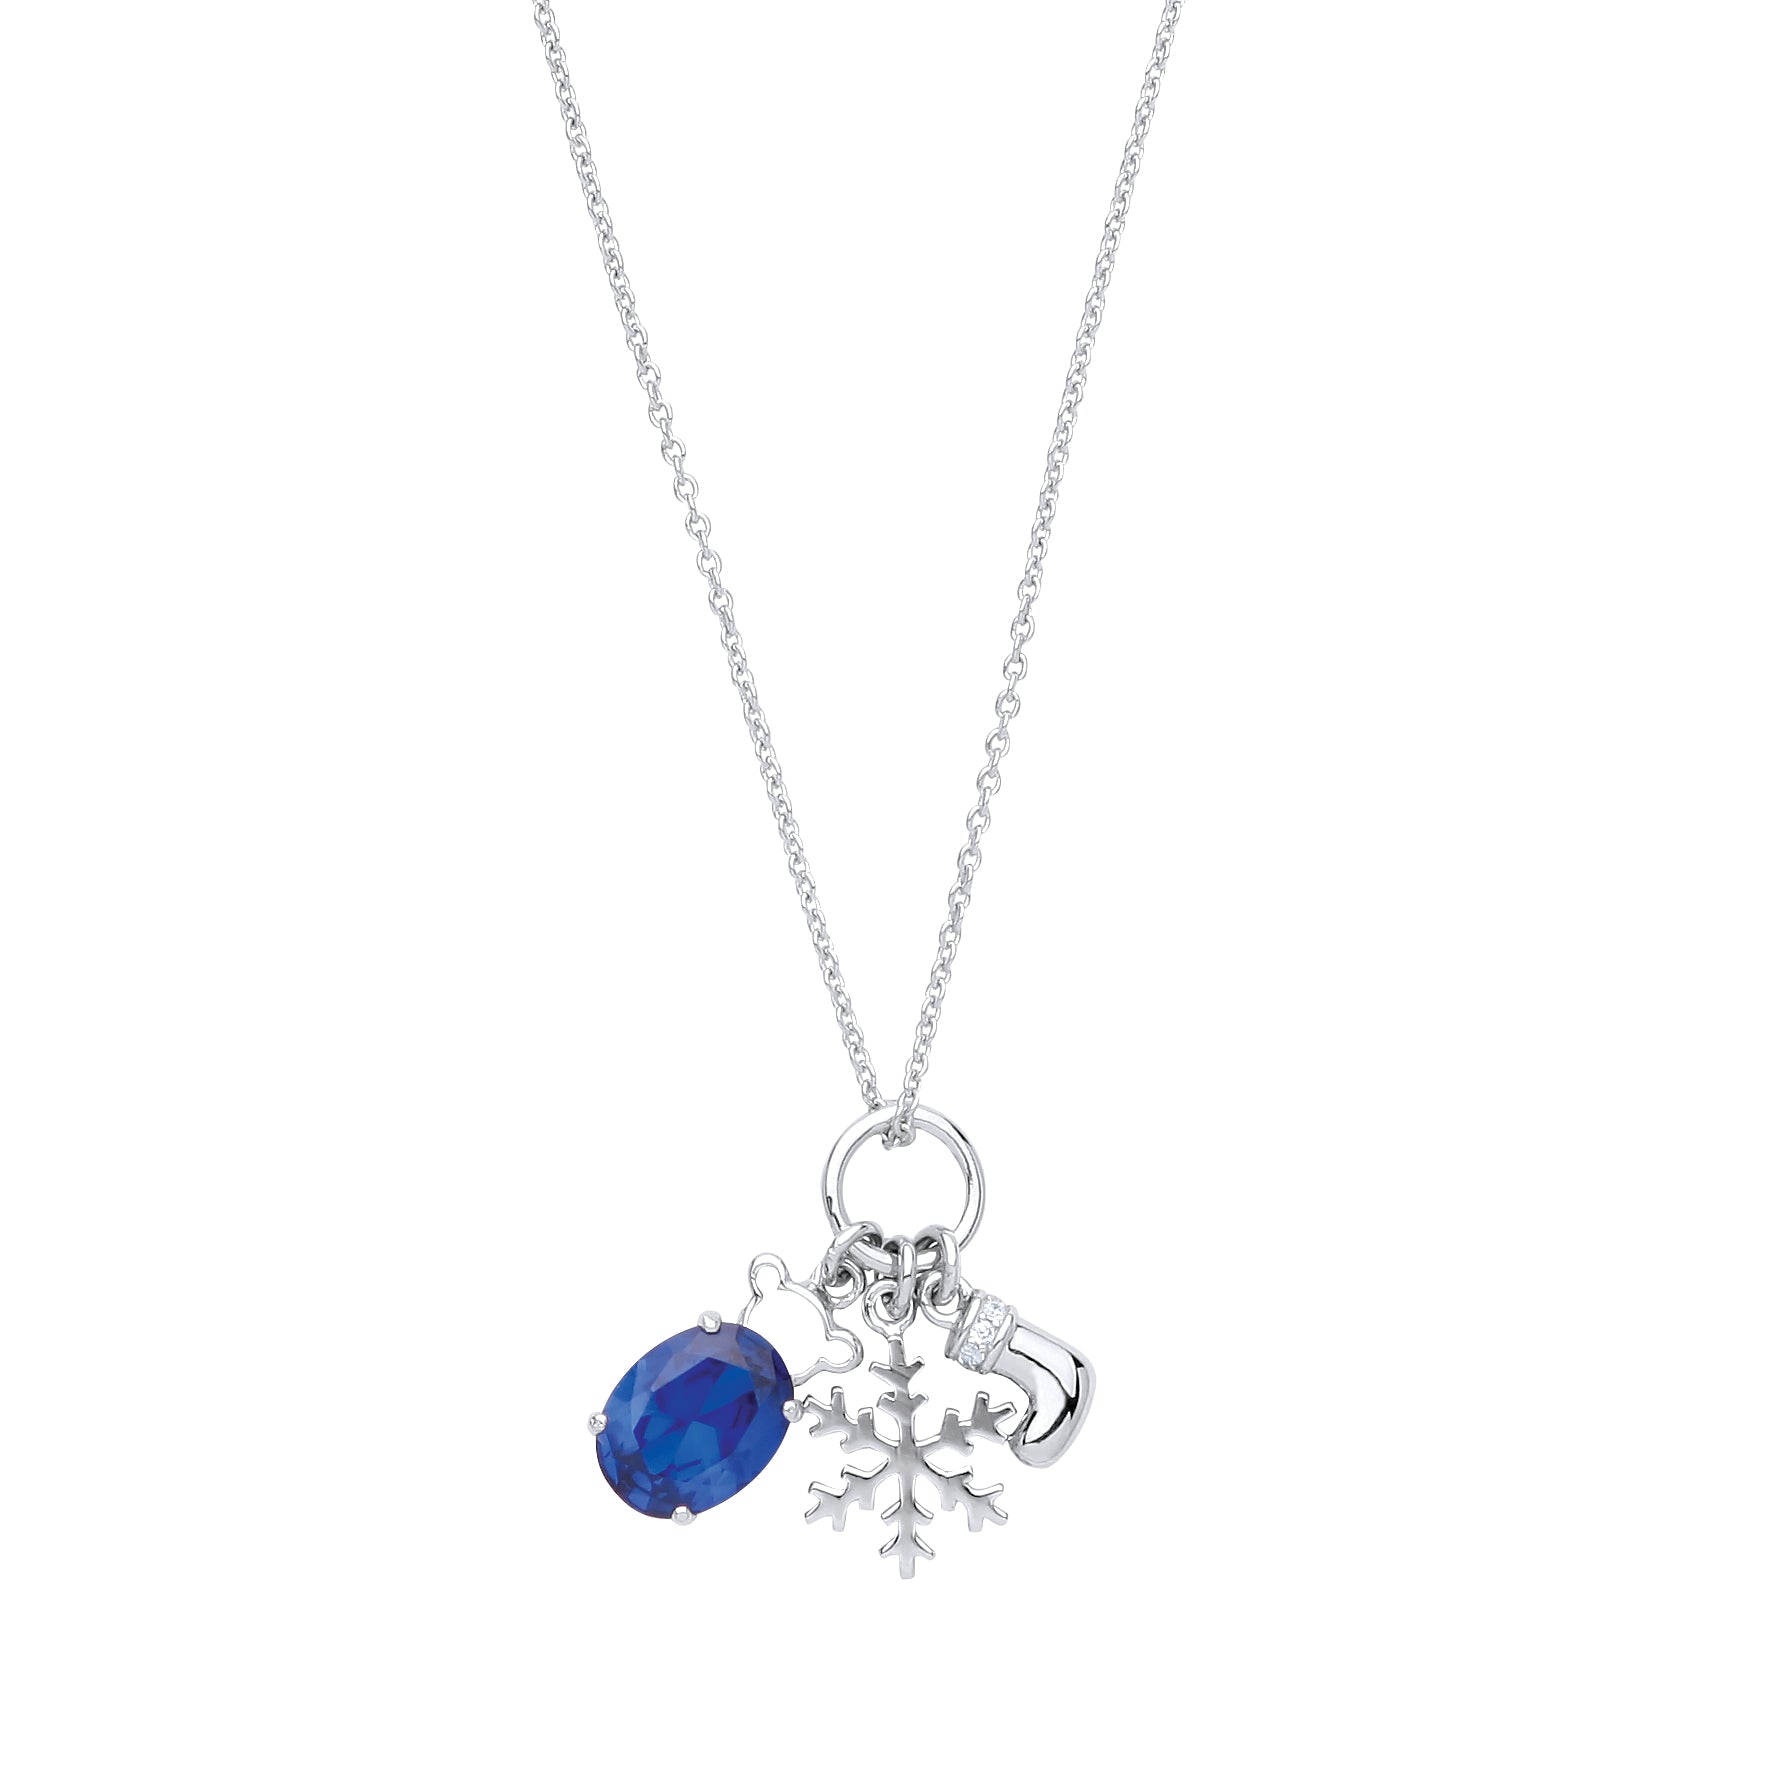 Silver  Blue oval CZ Snowflake Christmas Charm Necklace 16 + 2" - GVK233